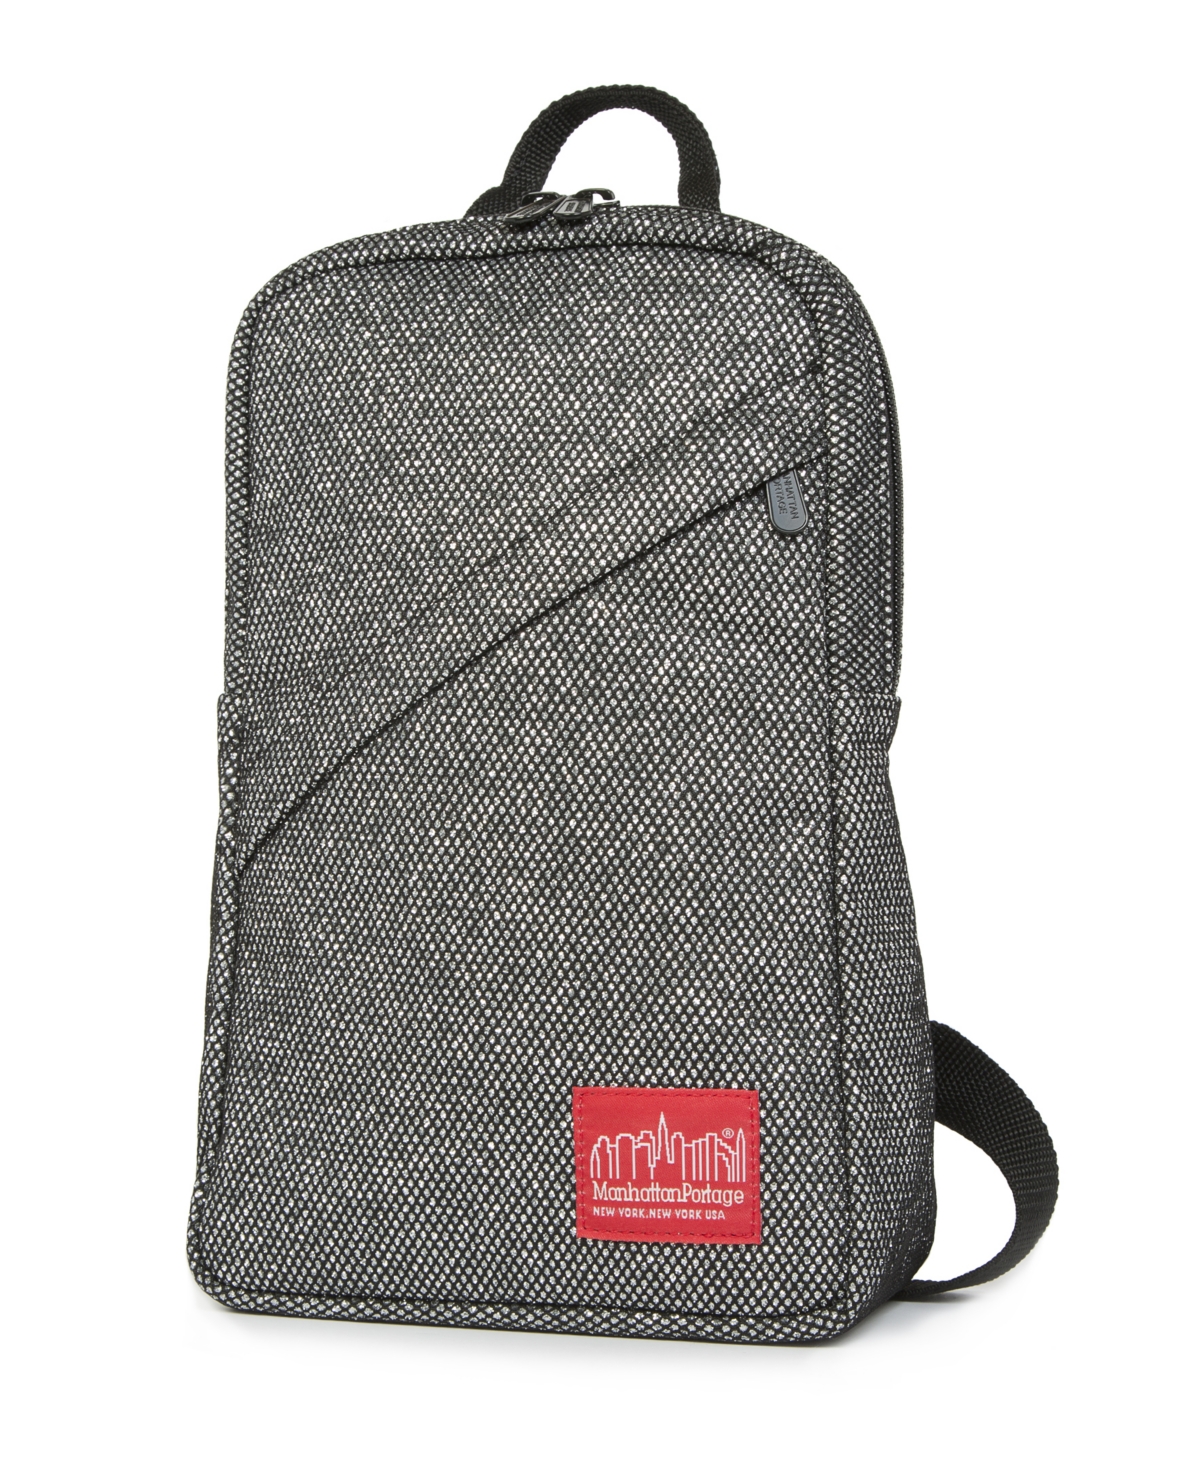 Midnight Ellis Backpack with Zipper Pocket - Pewter